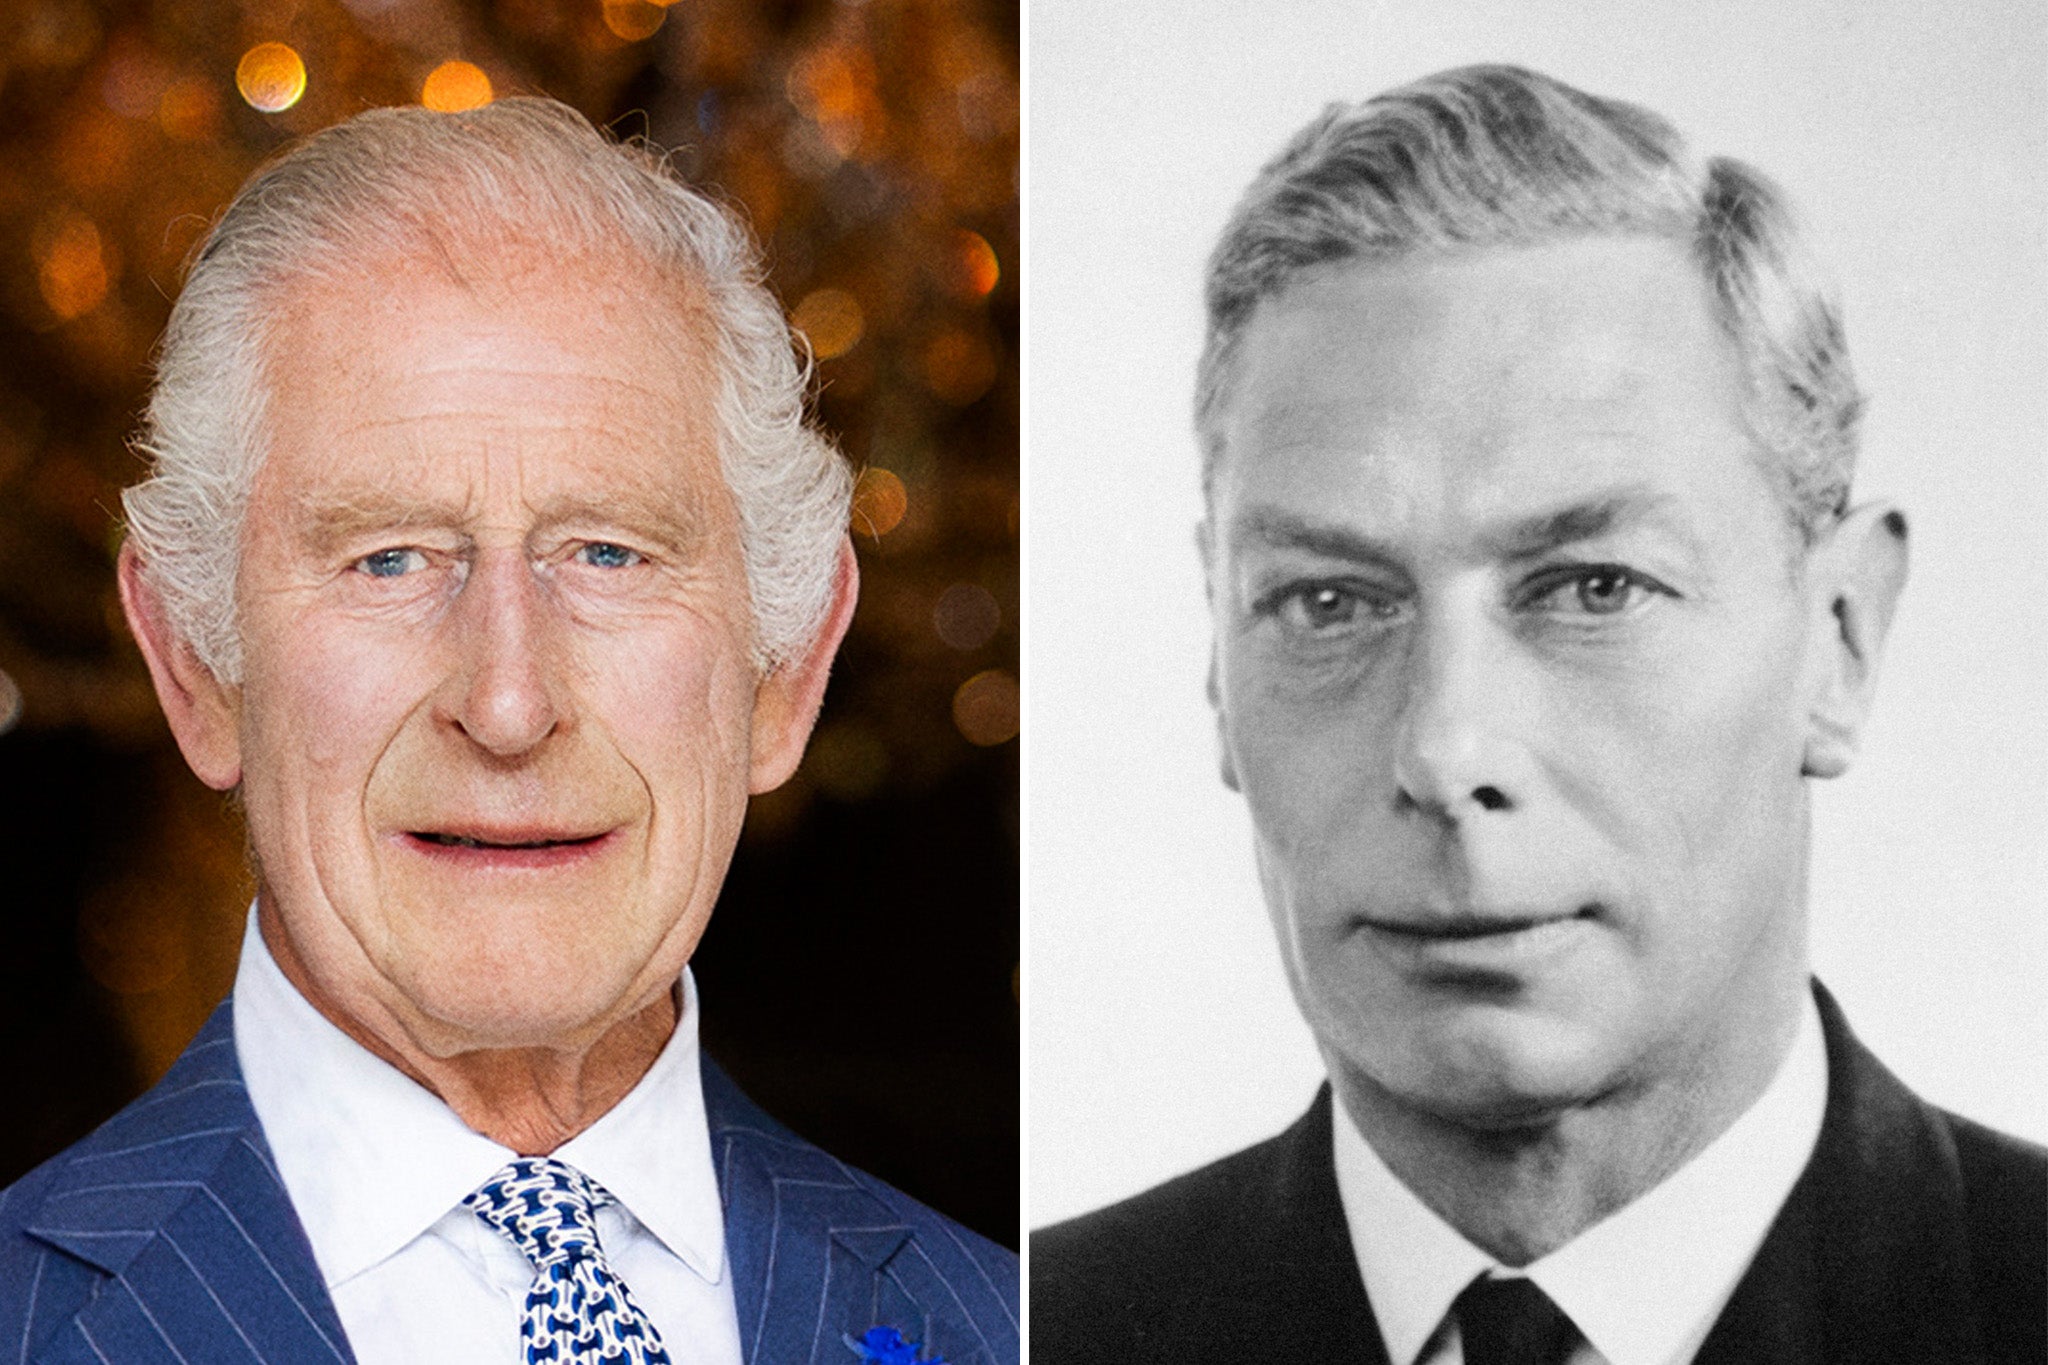 Unlike under Charles III, in George VI’s time, euphemism and secrecy were the order of the day